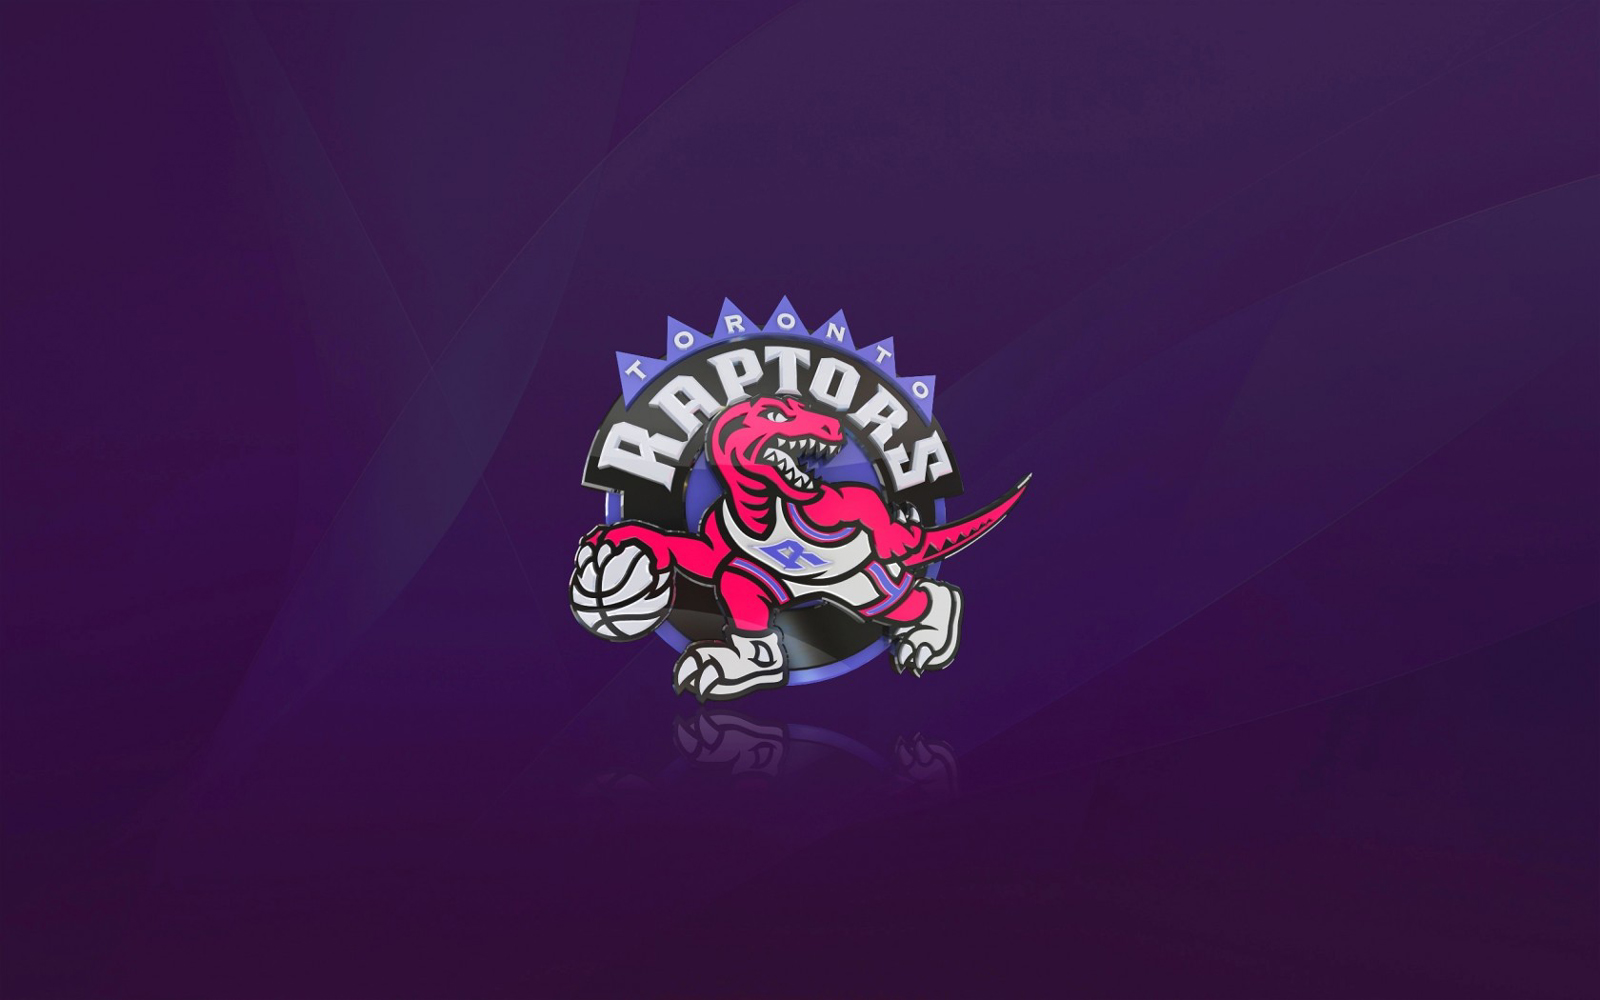 The Toronto Raptors Is A Professional Basketball Team Based In